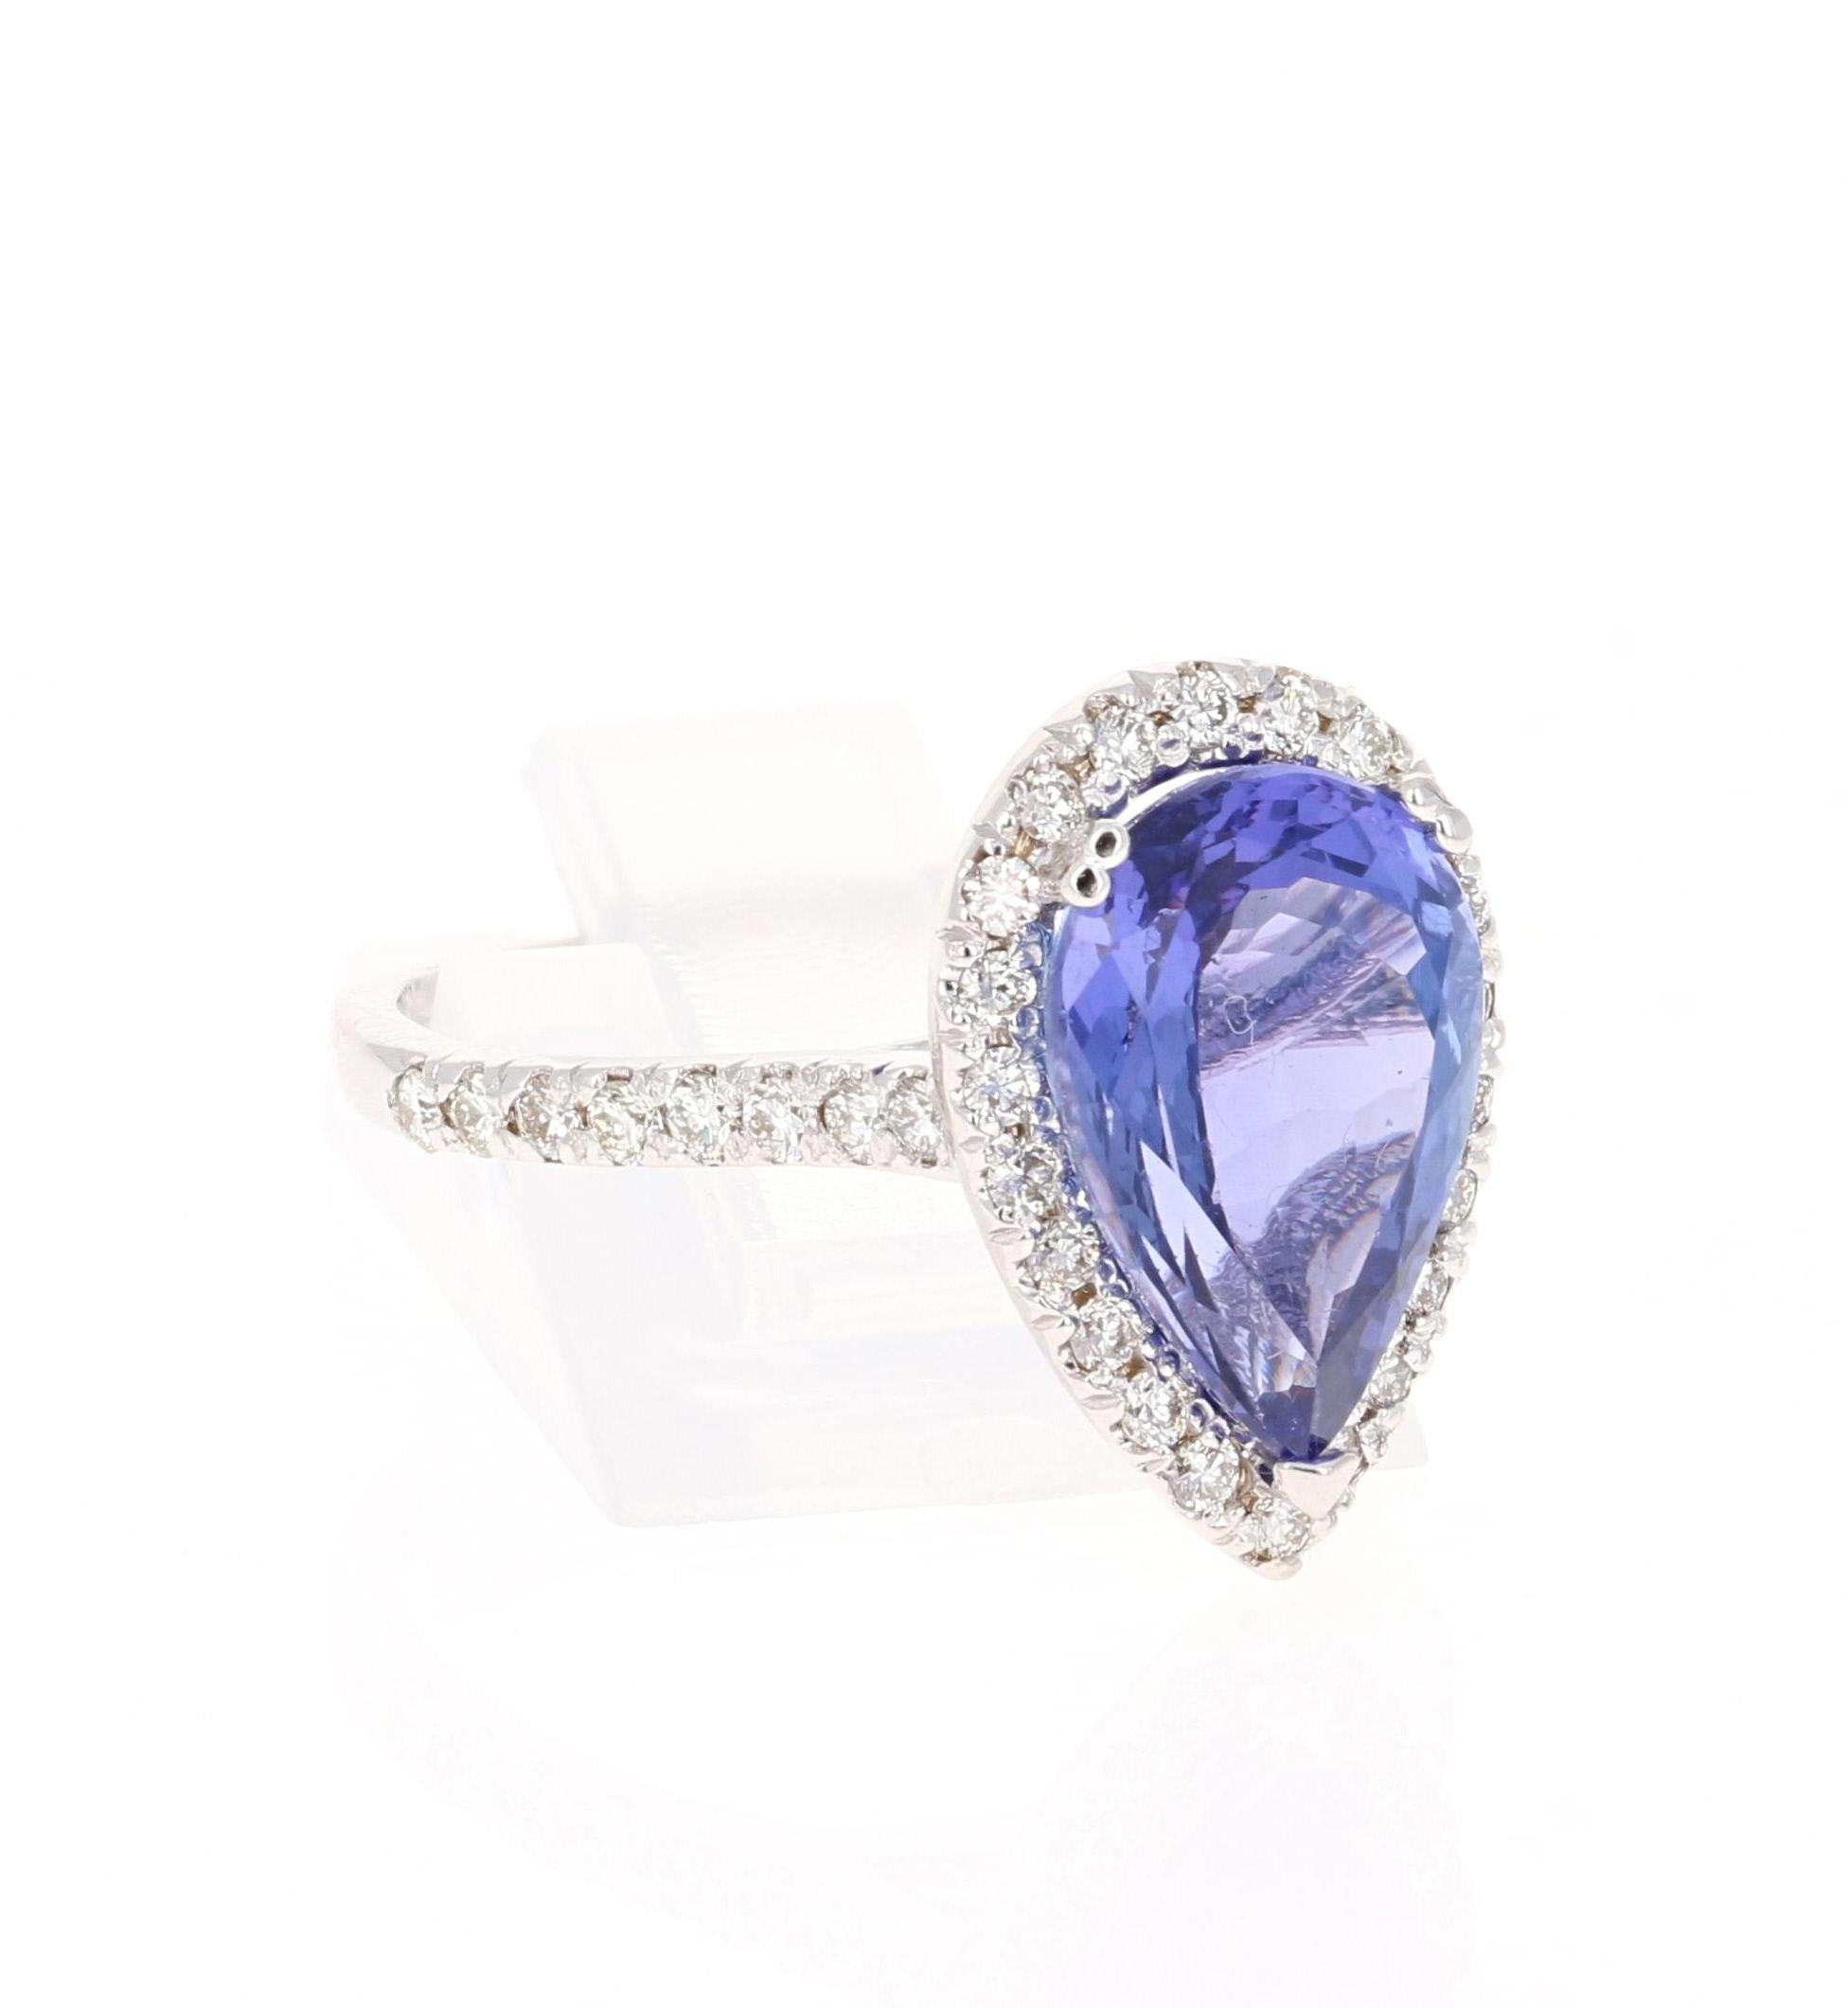 Elegant & Magnificent, Classic Tanzanite & Diamond Ring! 

This ring has a beautiful Pear Cut Tanzanite weighing 3.90 Carats. It is surrounded by a halo of 38 Round Cut Diamonds that weigh 0.46 Carats with a clarity and color of VS-H. The total